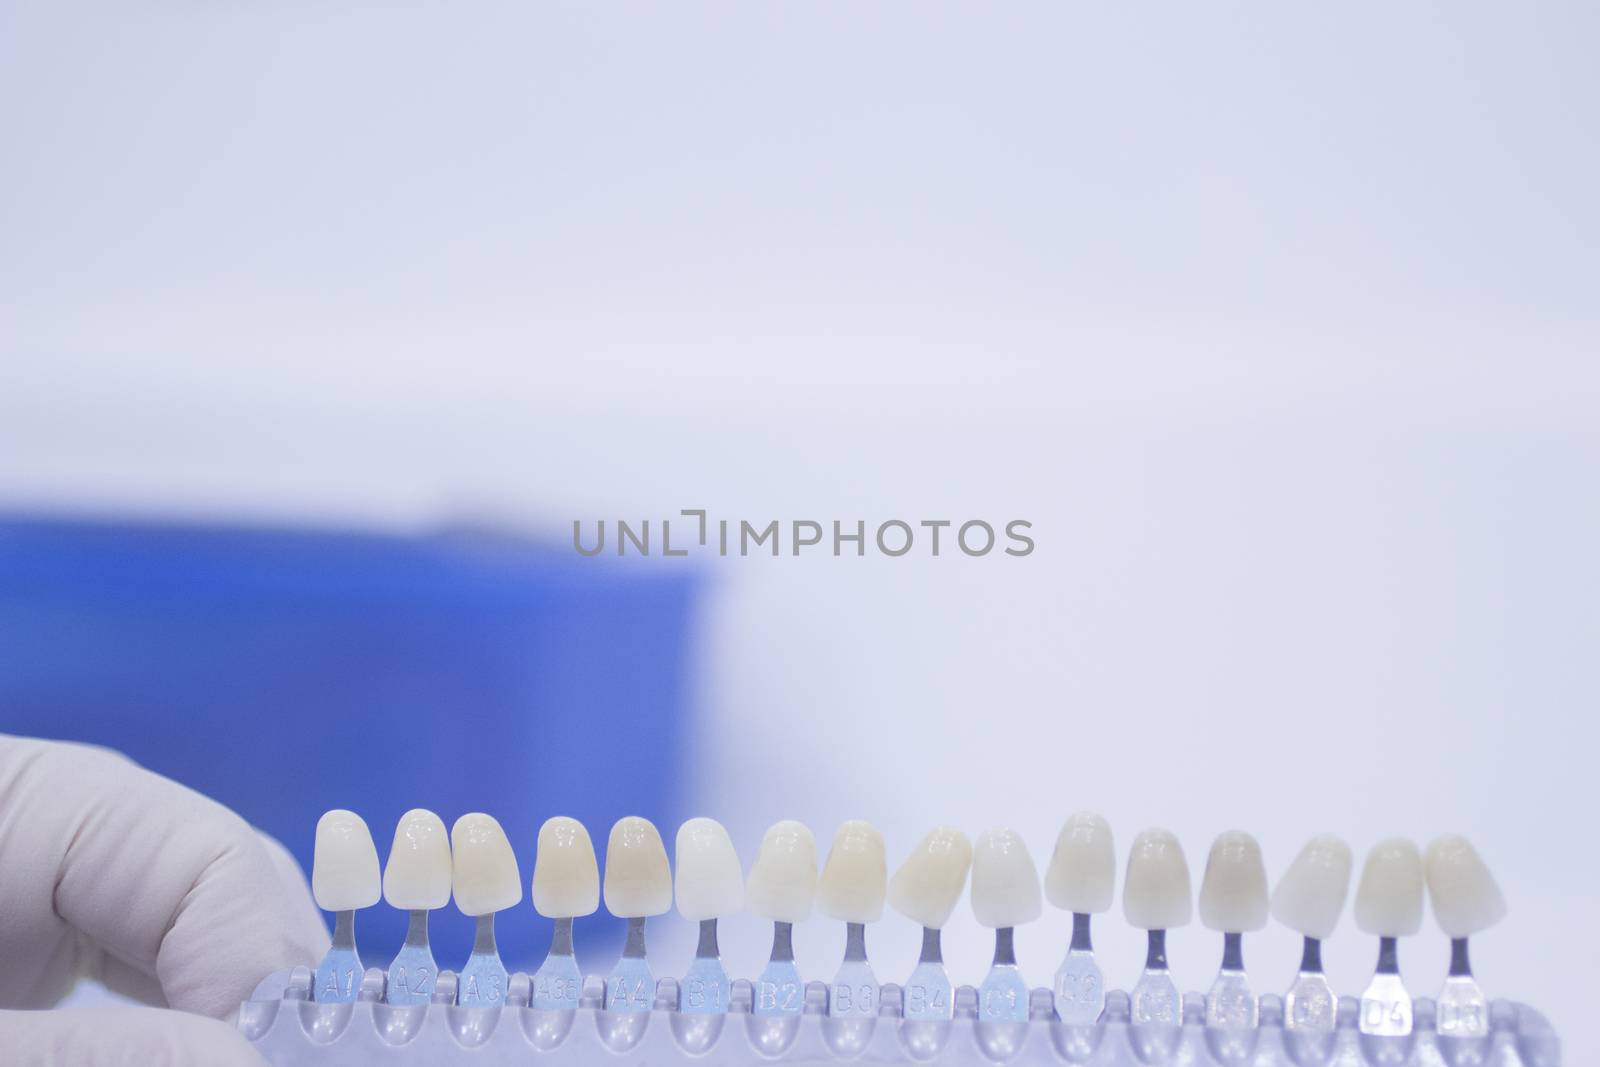 Dental nurse holding implant and crown tooth color guide by edwardolive